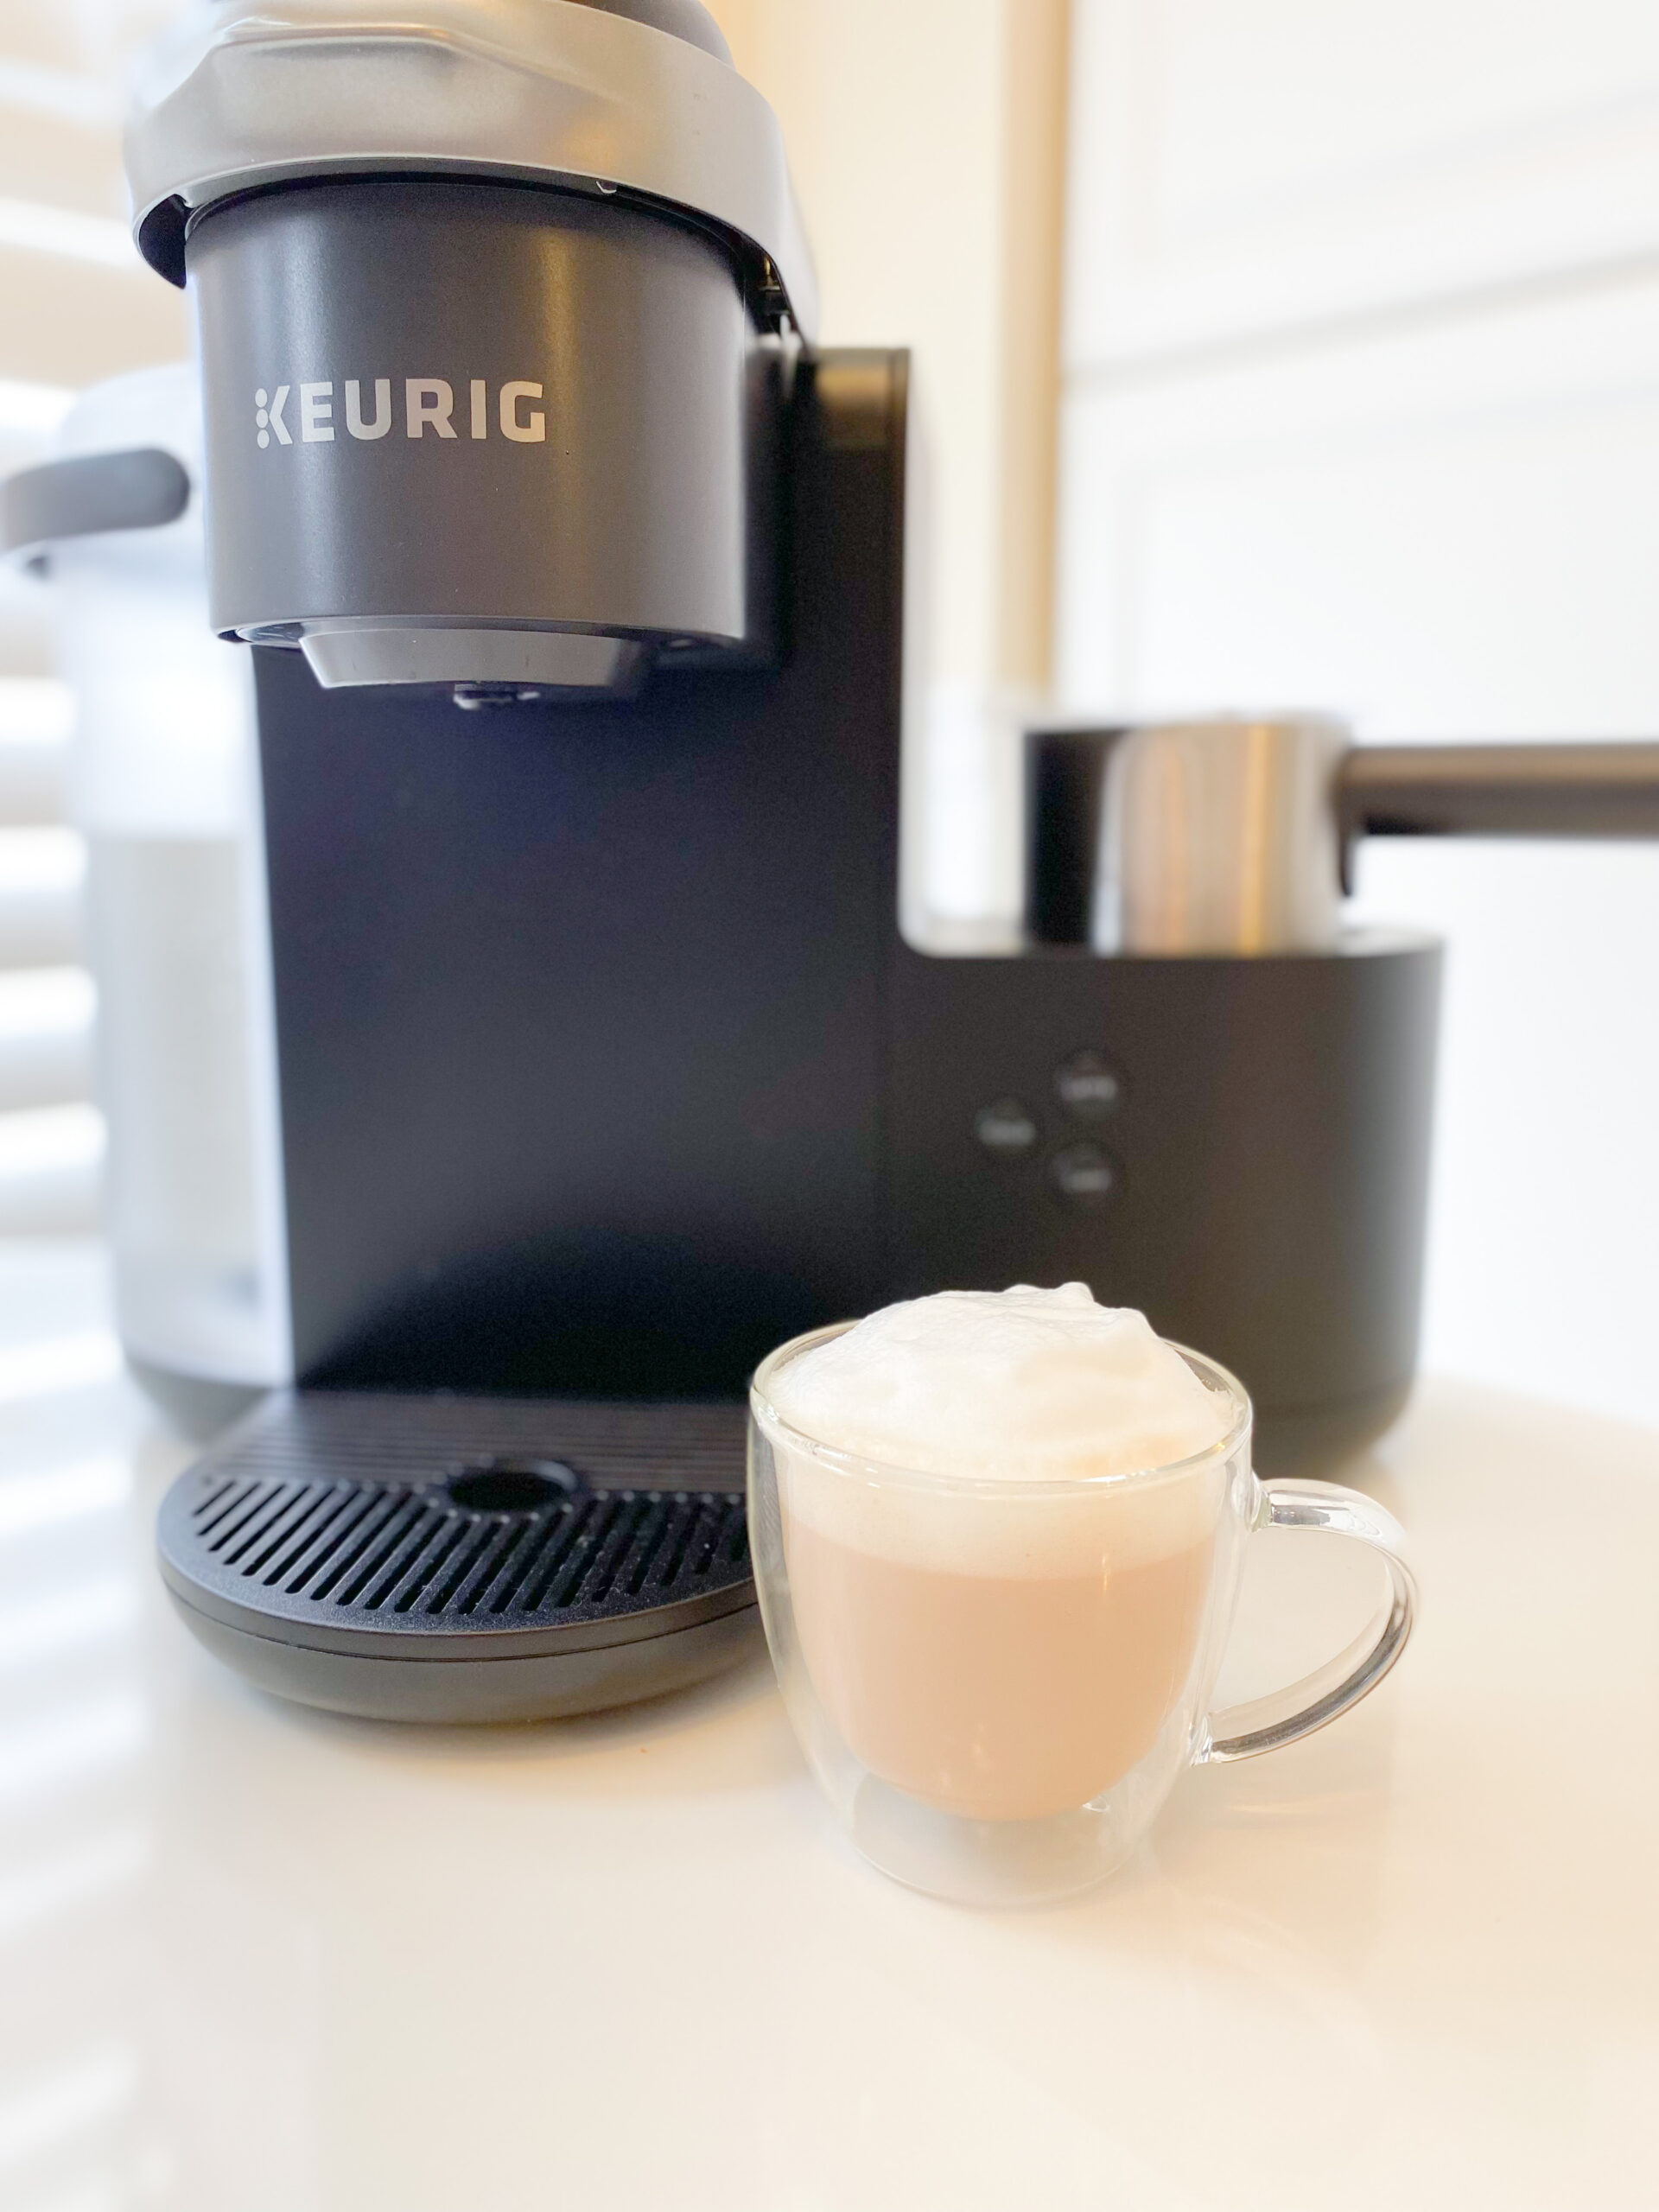 Keurig Cafe Machine on Livin' Life with Style Holiday Gift Guide for her